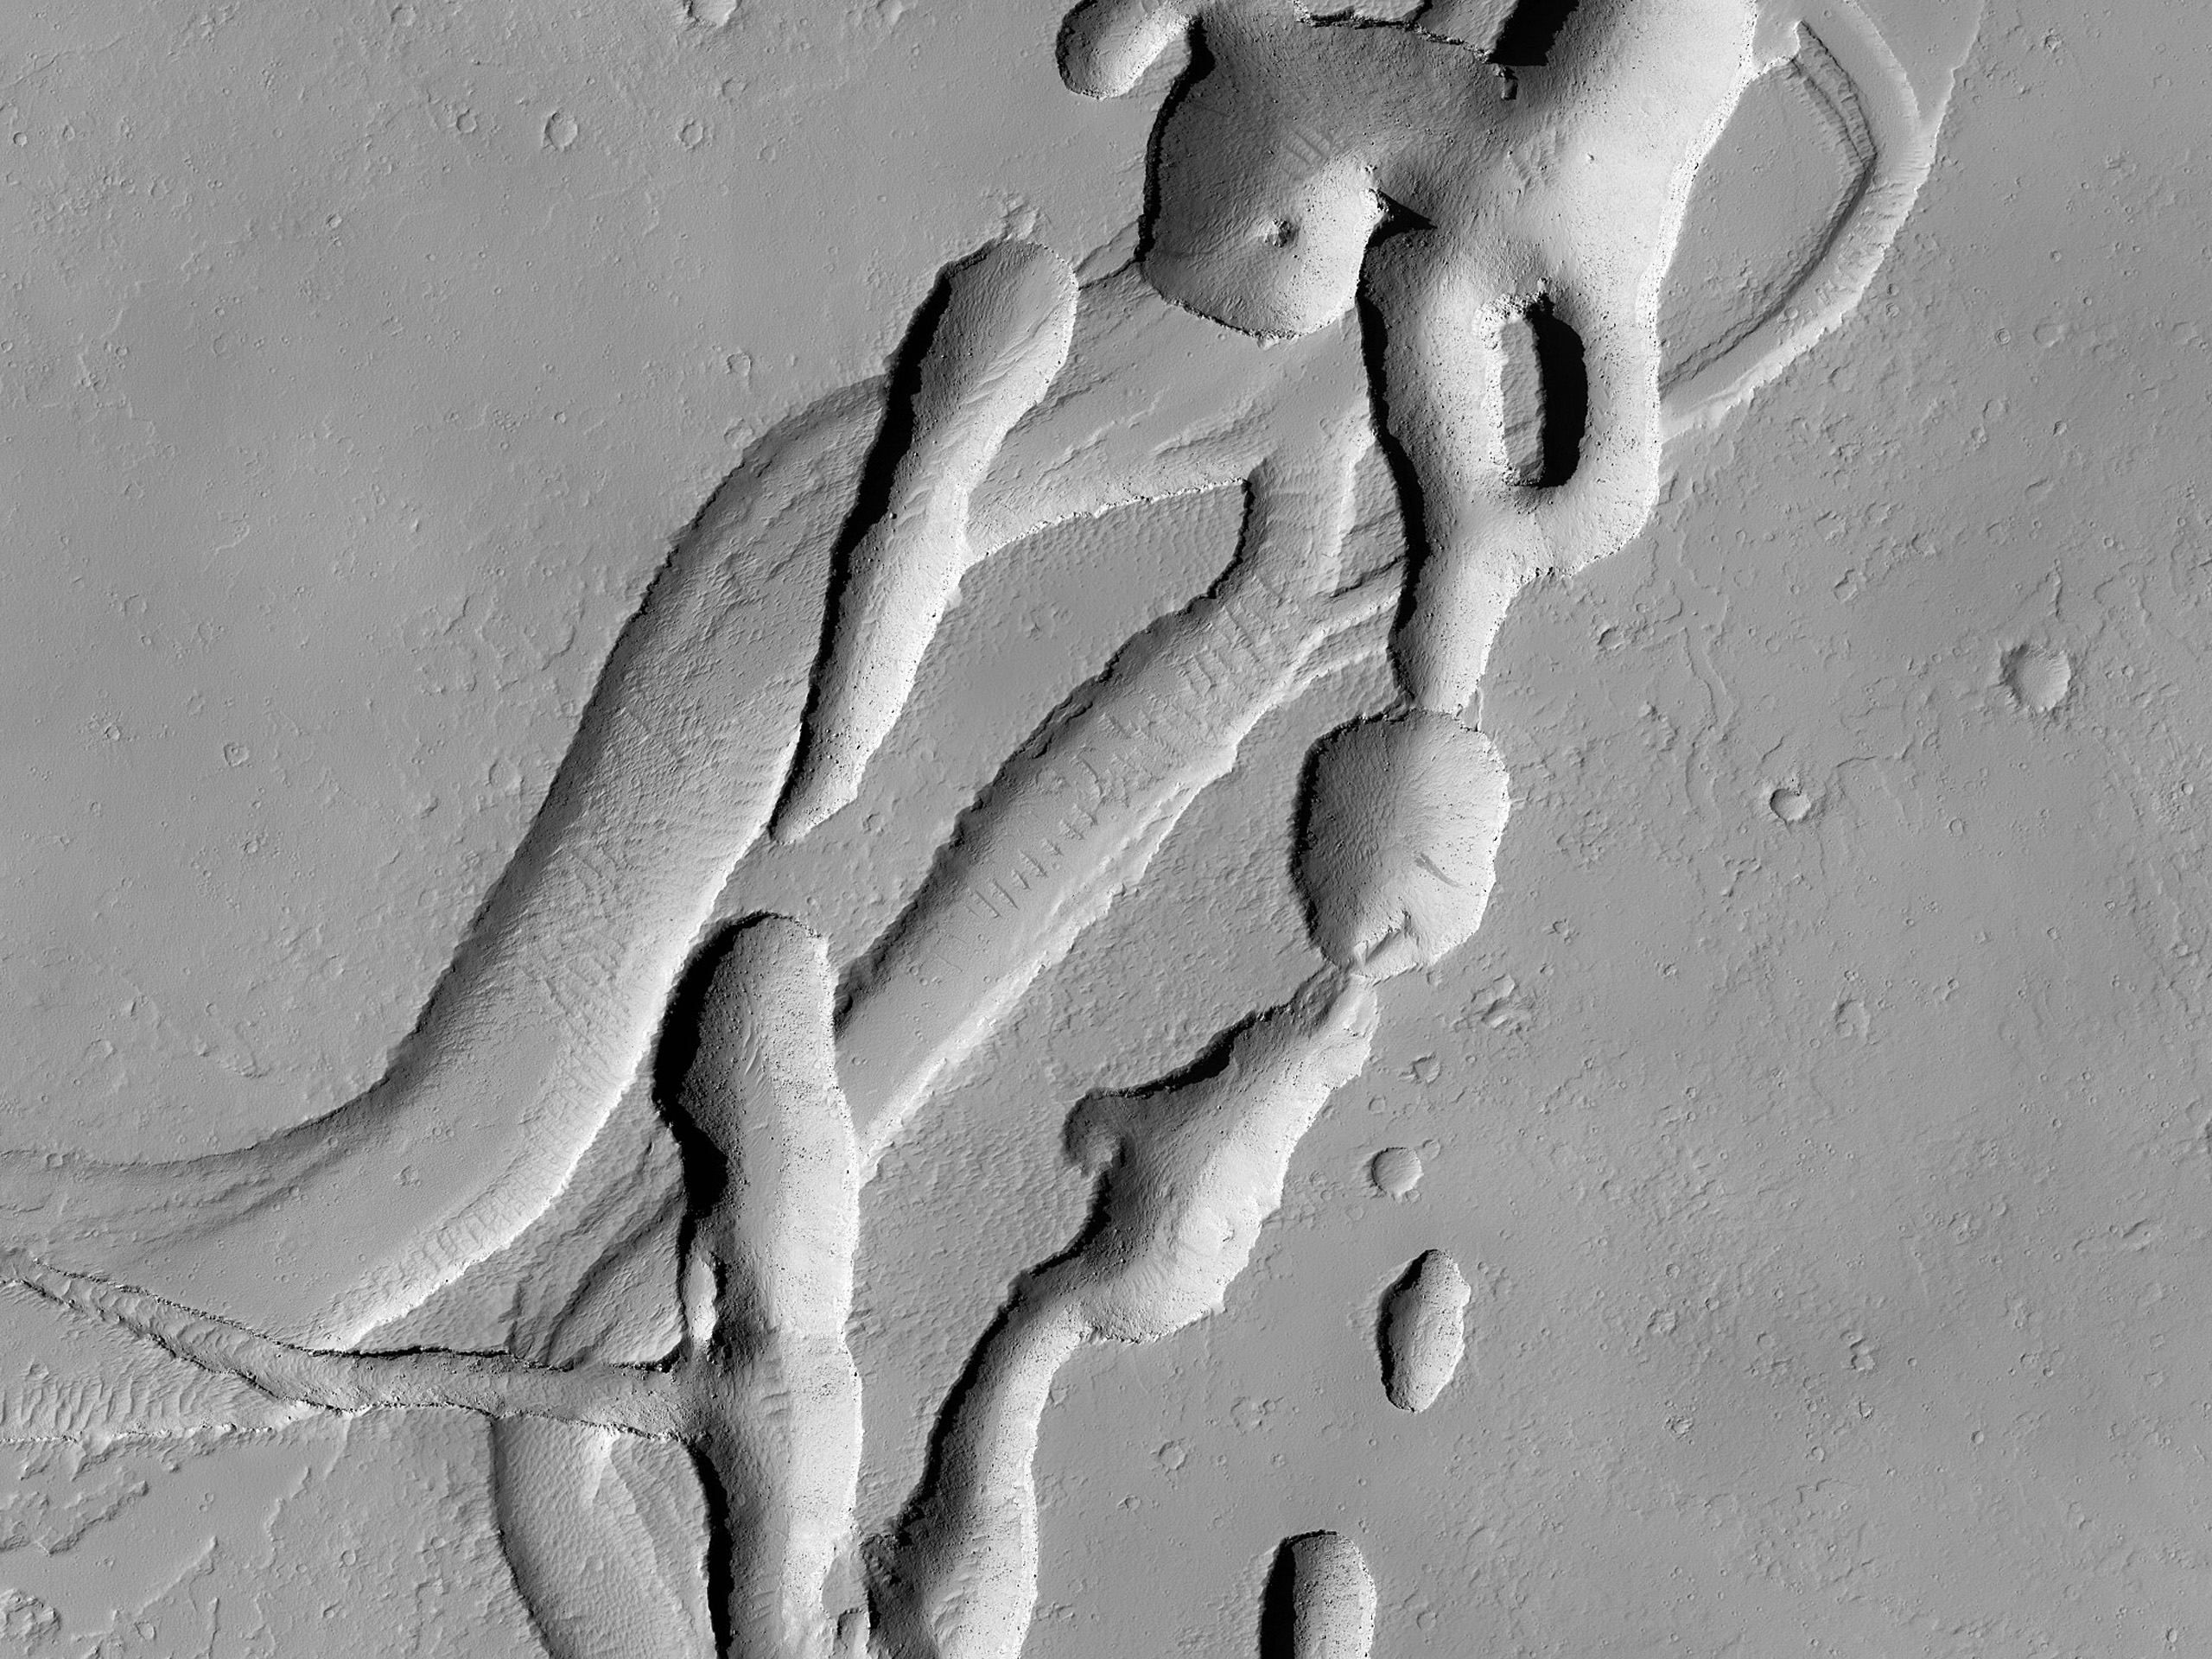 Intersecting Channels near Olympica Fossae